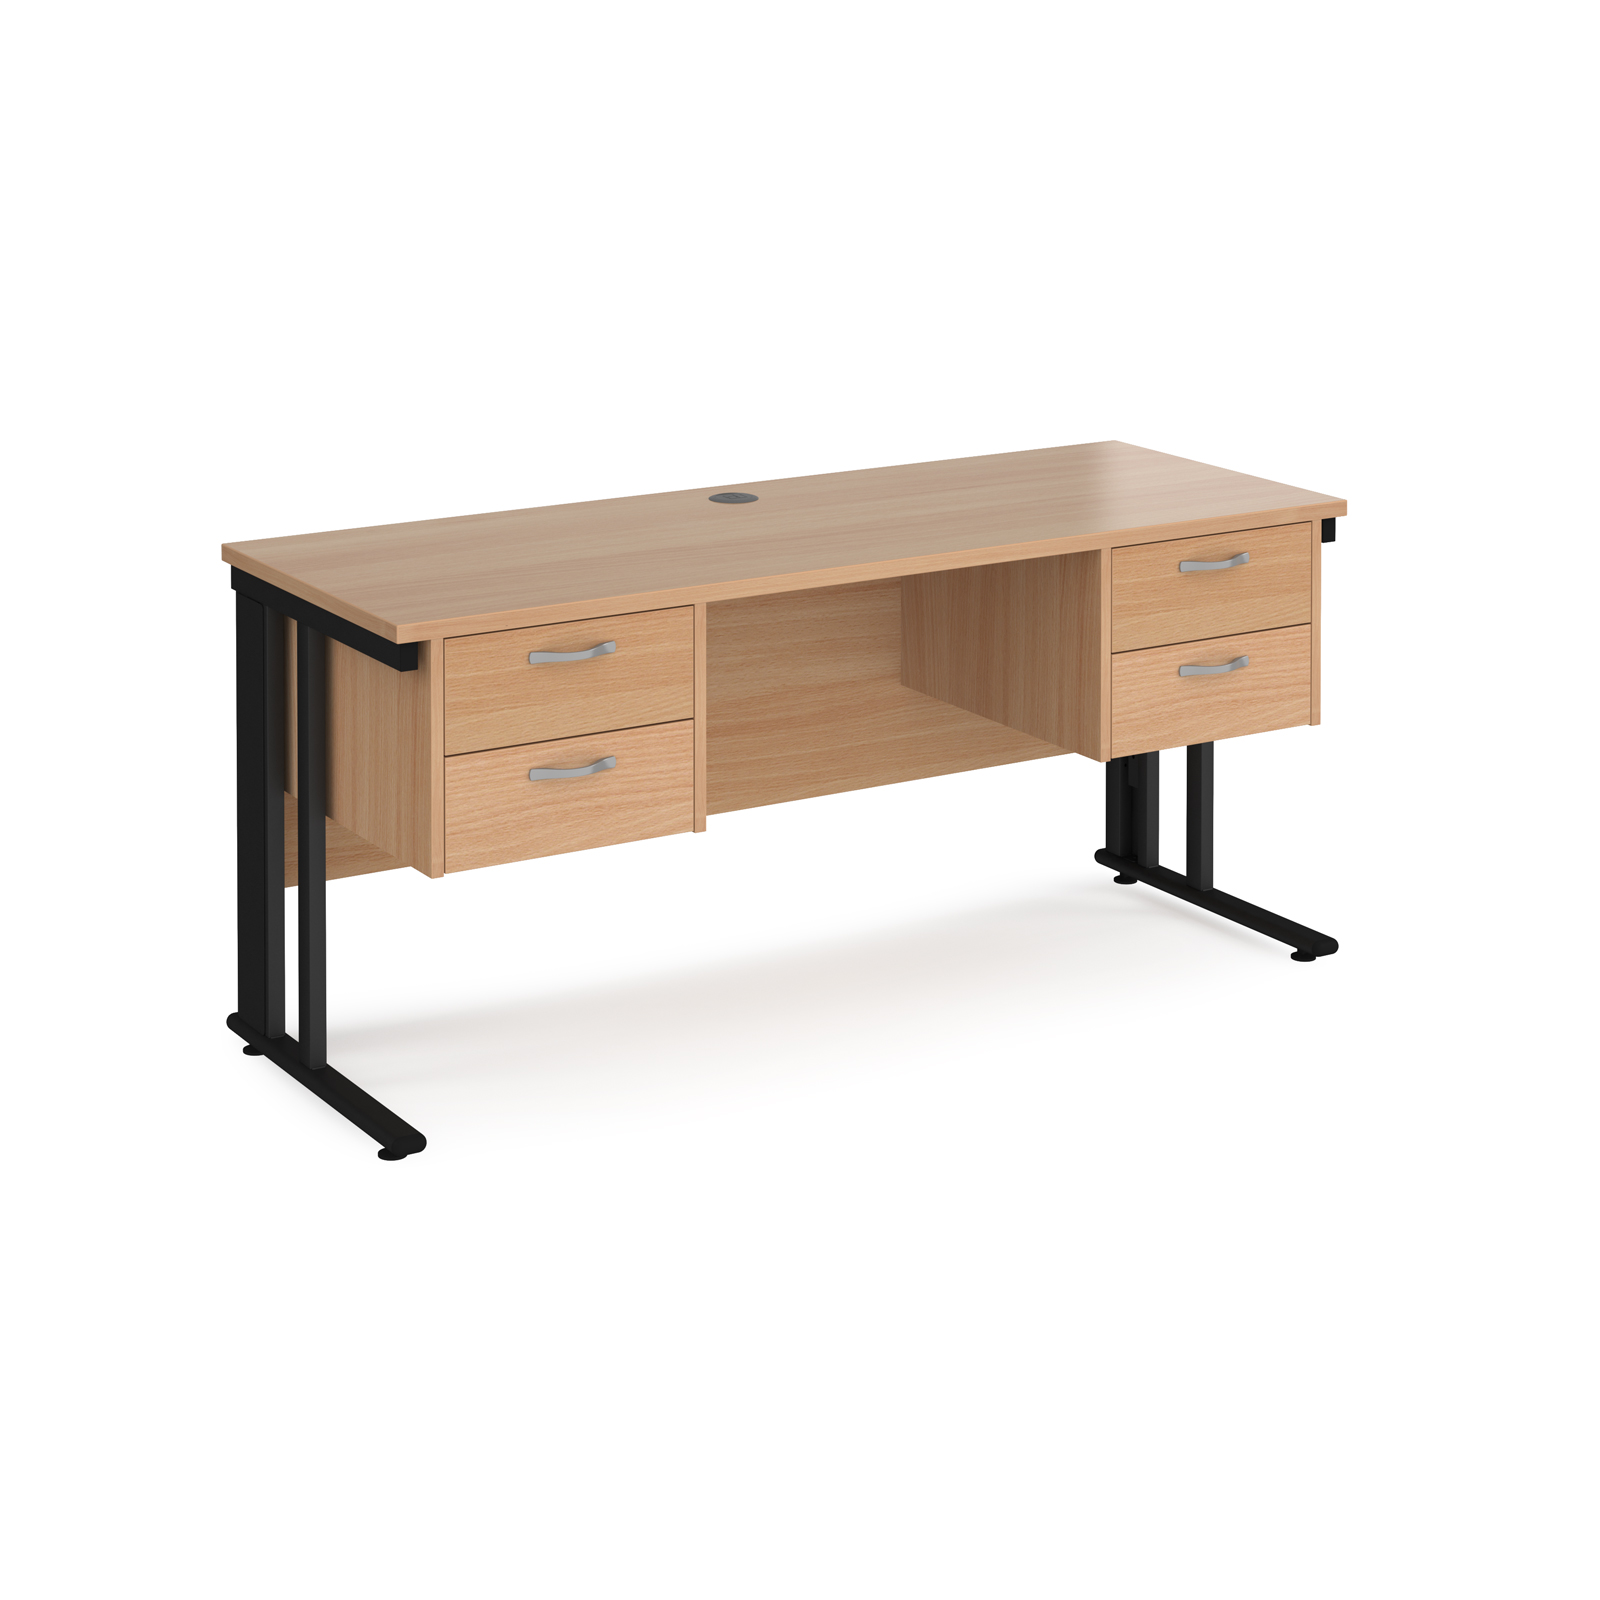 Maestro 25 straight desk 1600mm x 600mm with two x 2 drawer pedestals - black cable managed leg frame, beech top